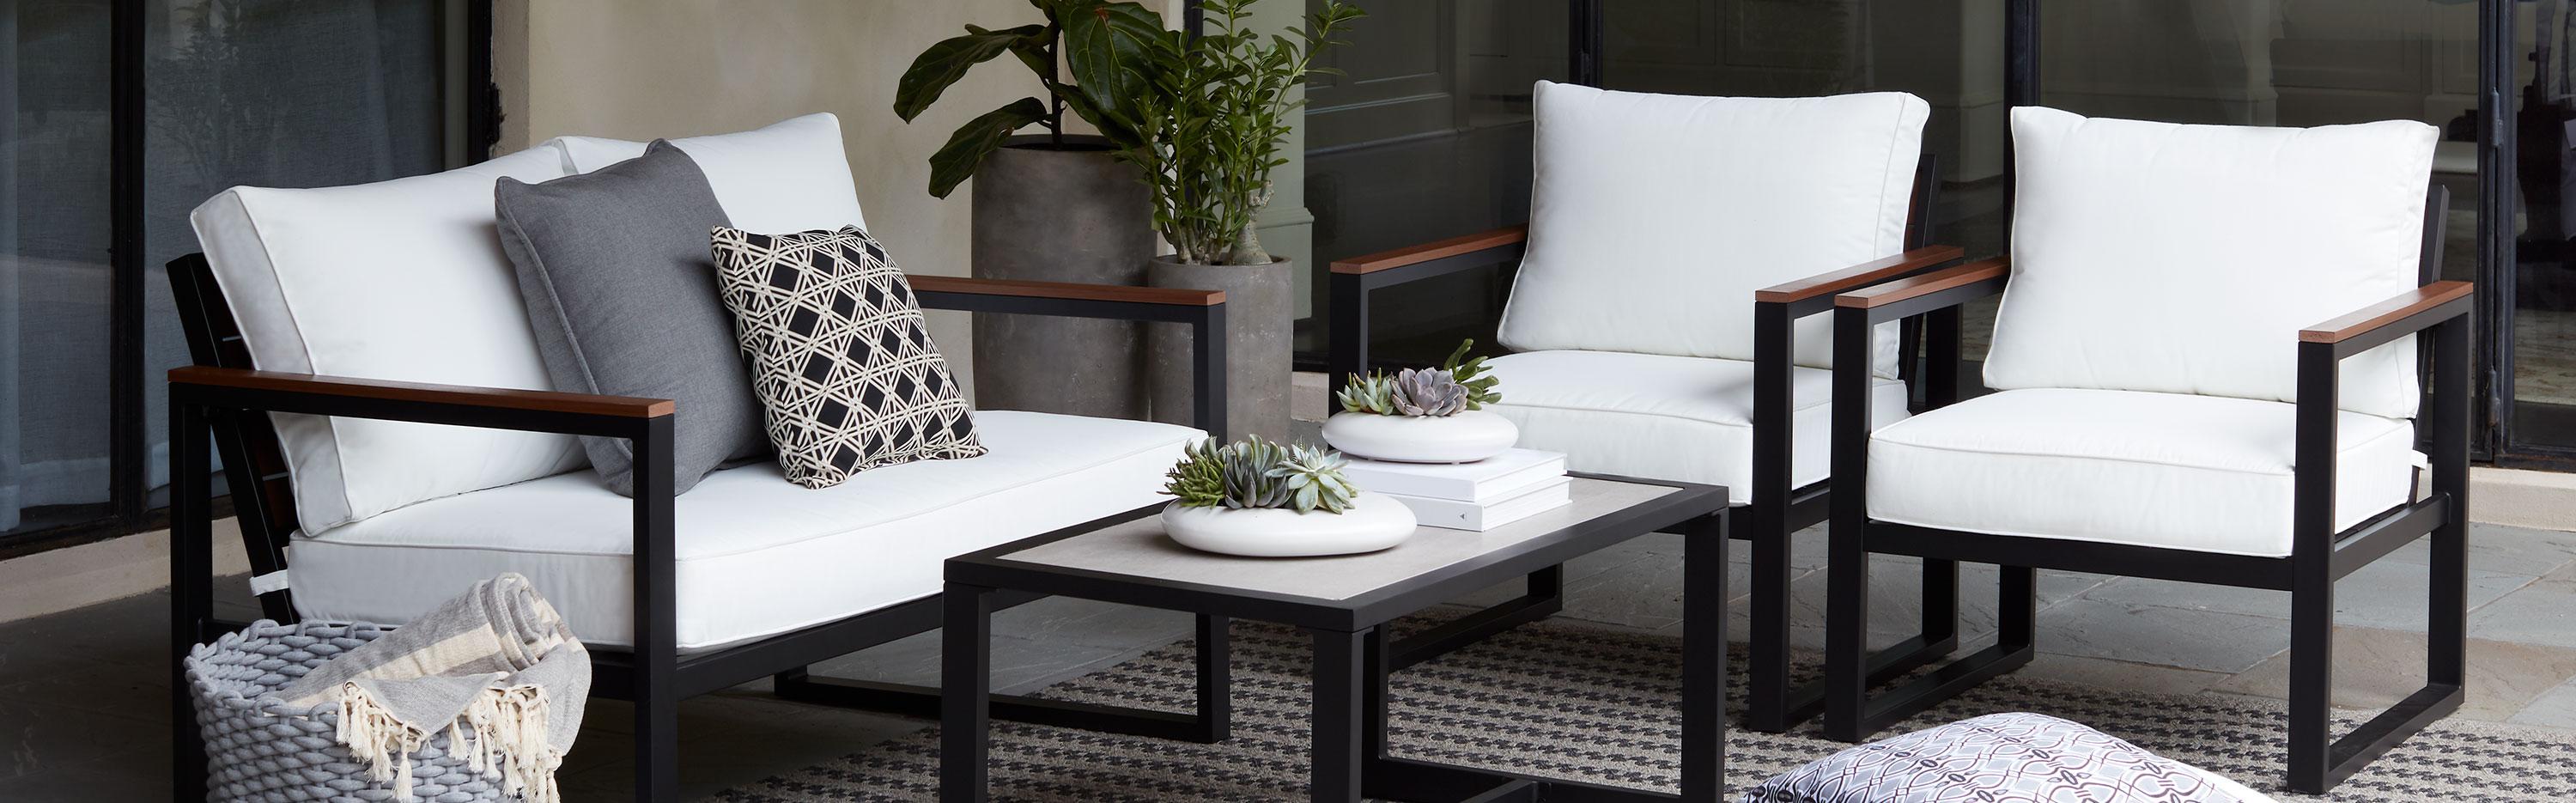 Inspiration - How to Choose the Right Outdoor Furniture Upholstery Fabric